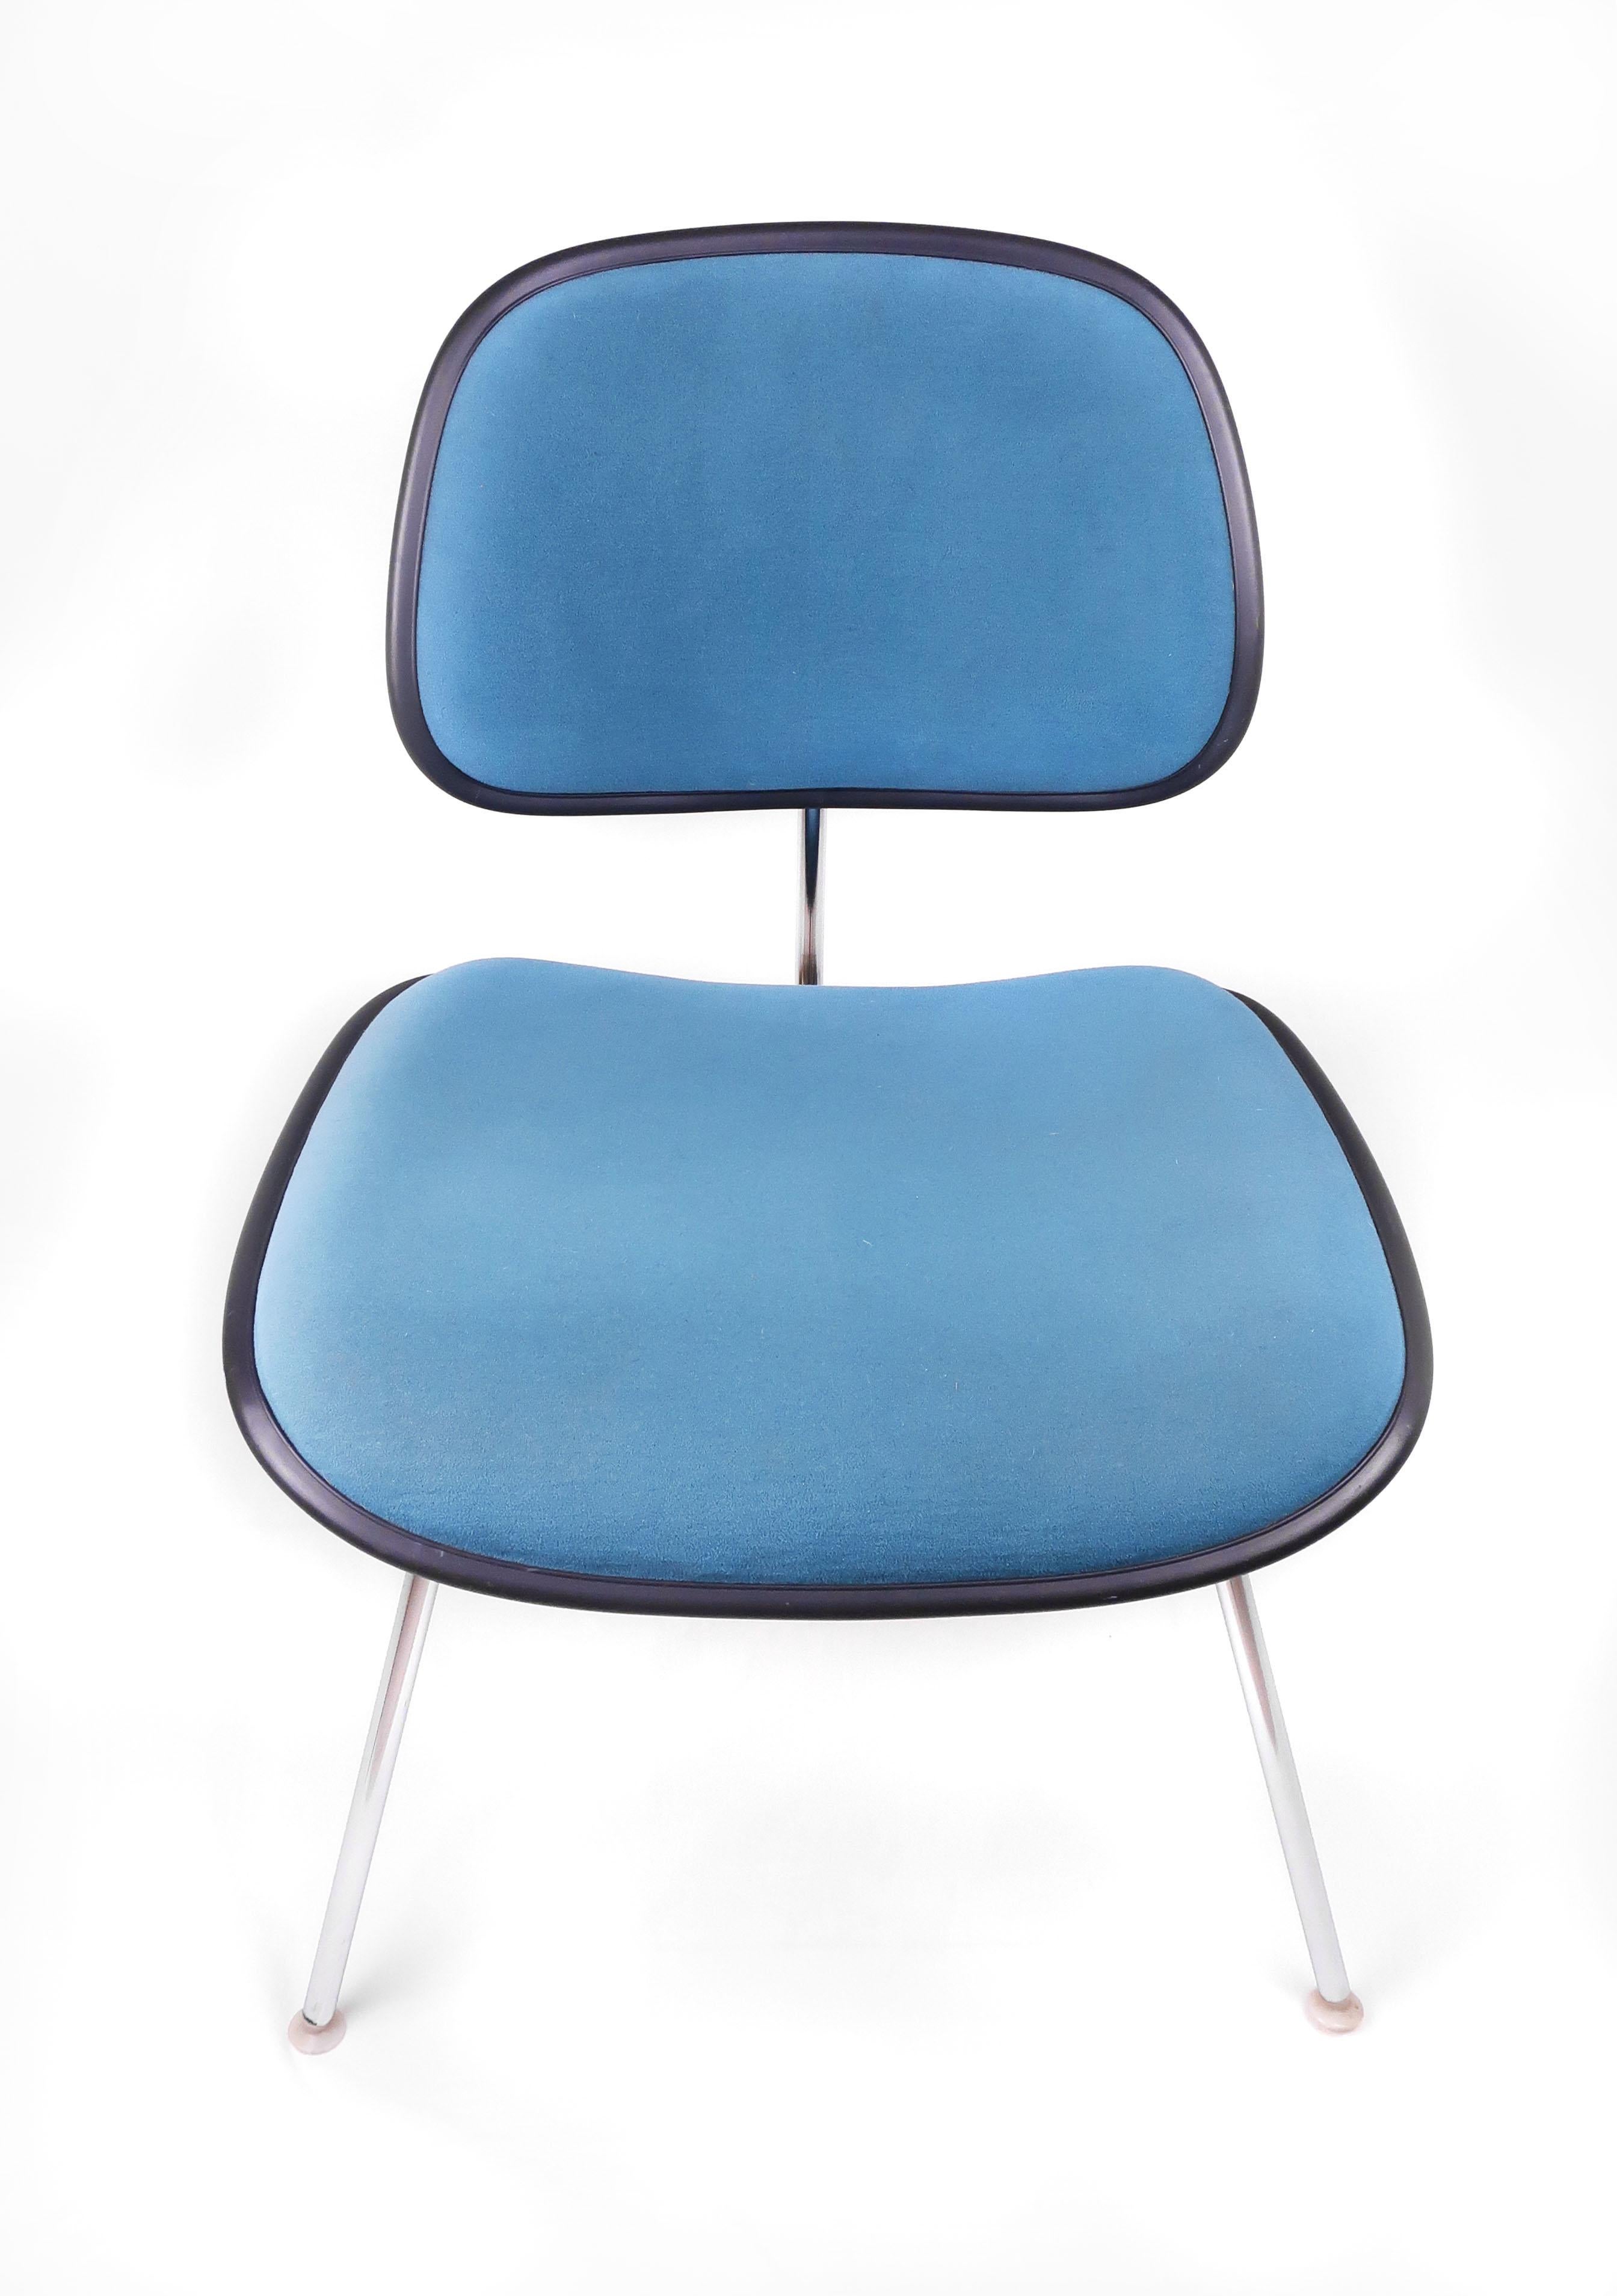 A vintage upholstered EC-127 DCM chairs by Ray and Charles Eames for Herman Miller. Molded plastic seats and backs with a lovely teal upholstery, black piping around the seat and back, chrome legs, and original Herman Miller label on underside. Very